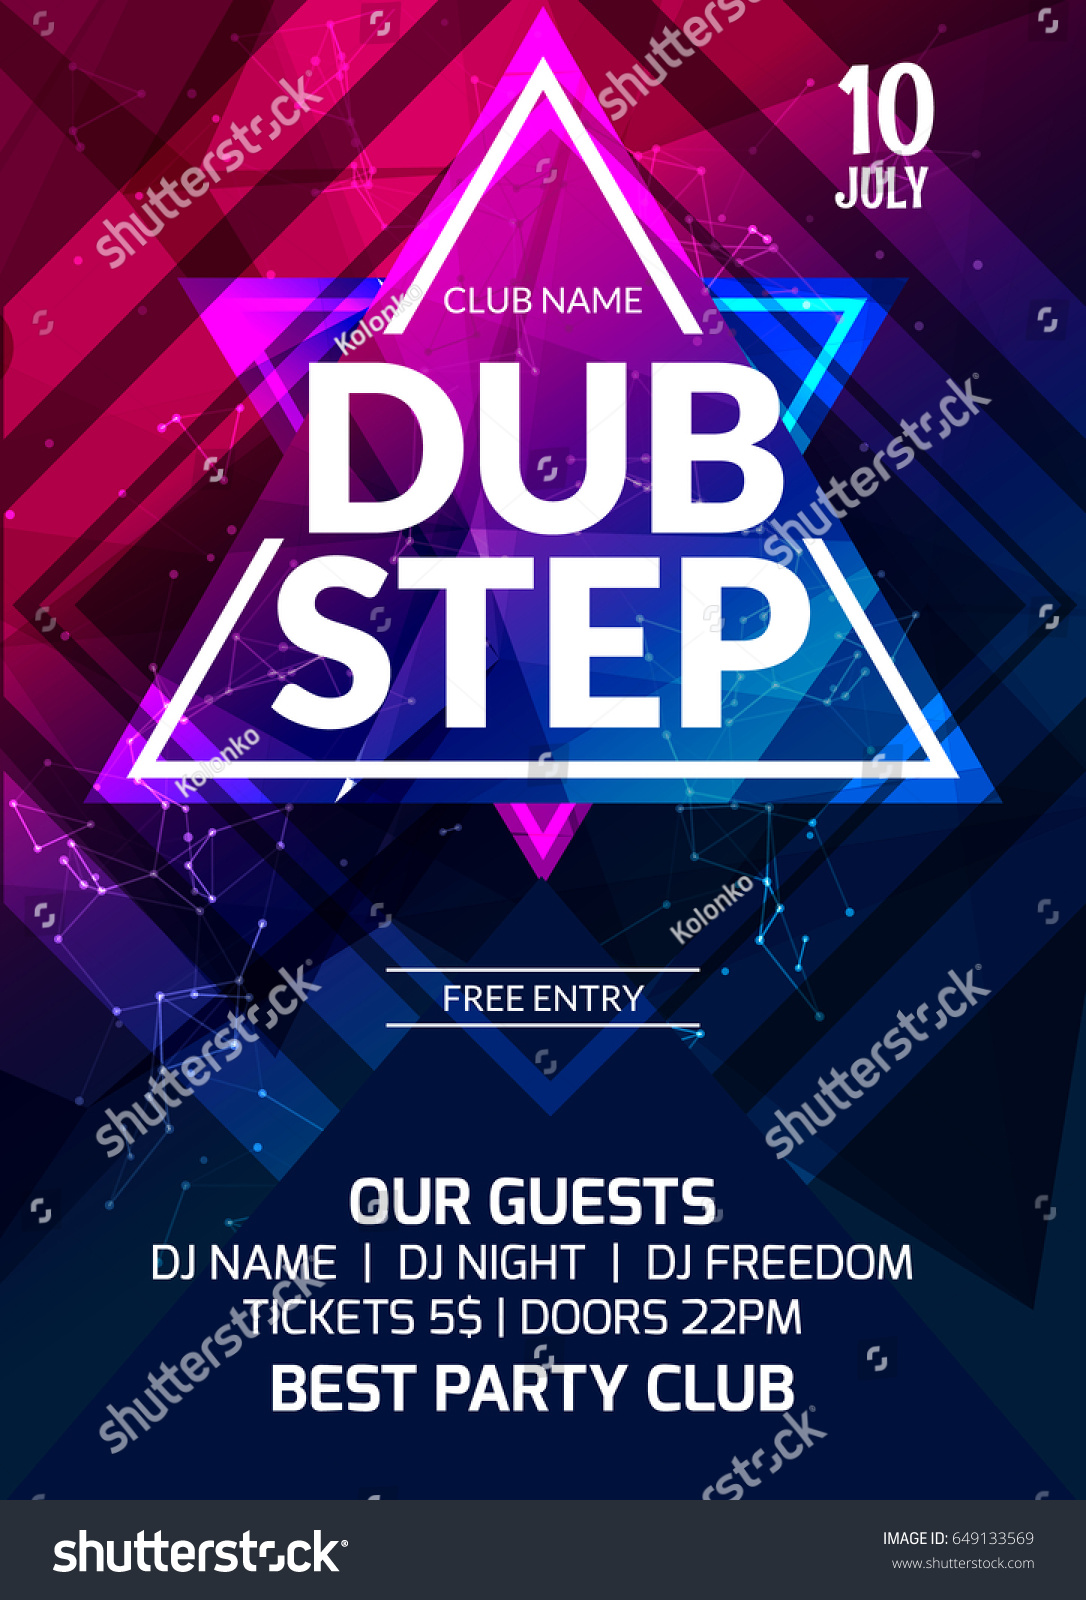 Dubstep Party Flyer Poster Futuristic Club Stock Vector Royalty Free